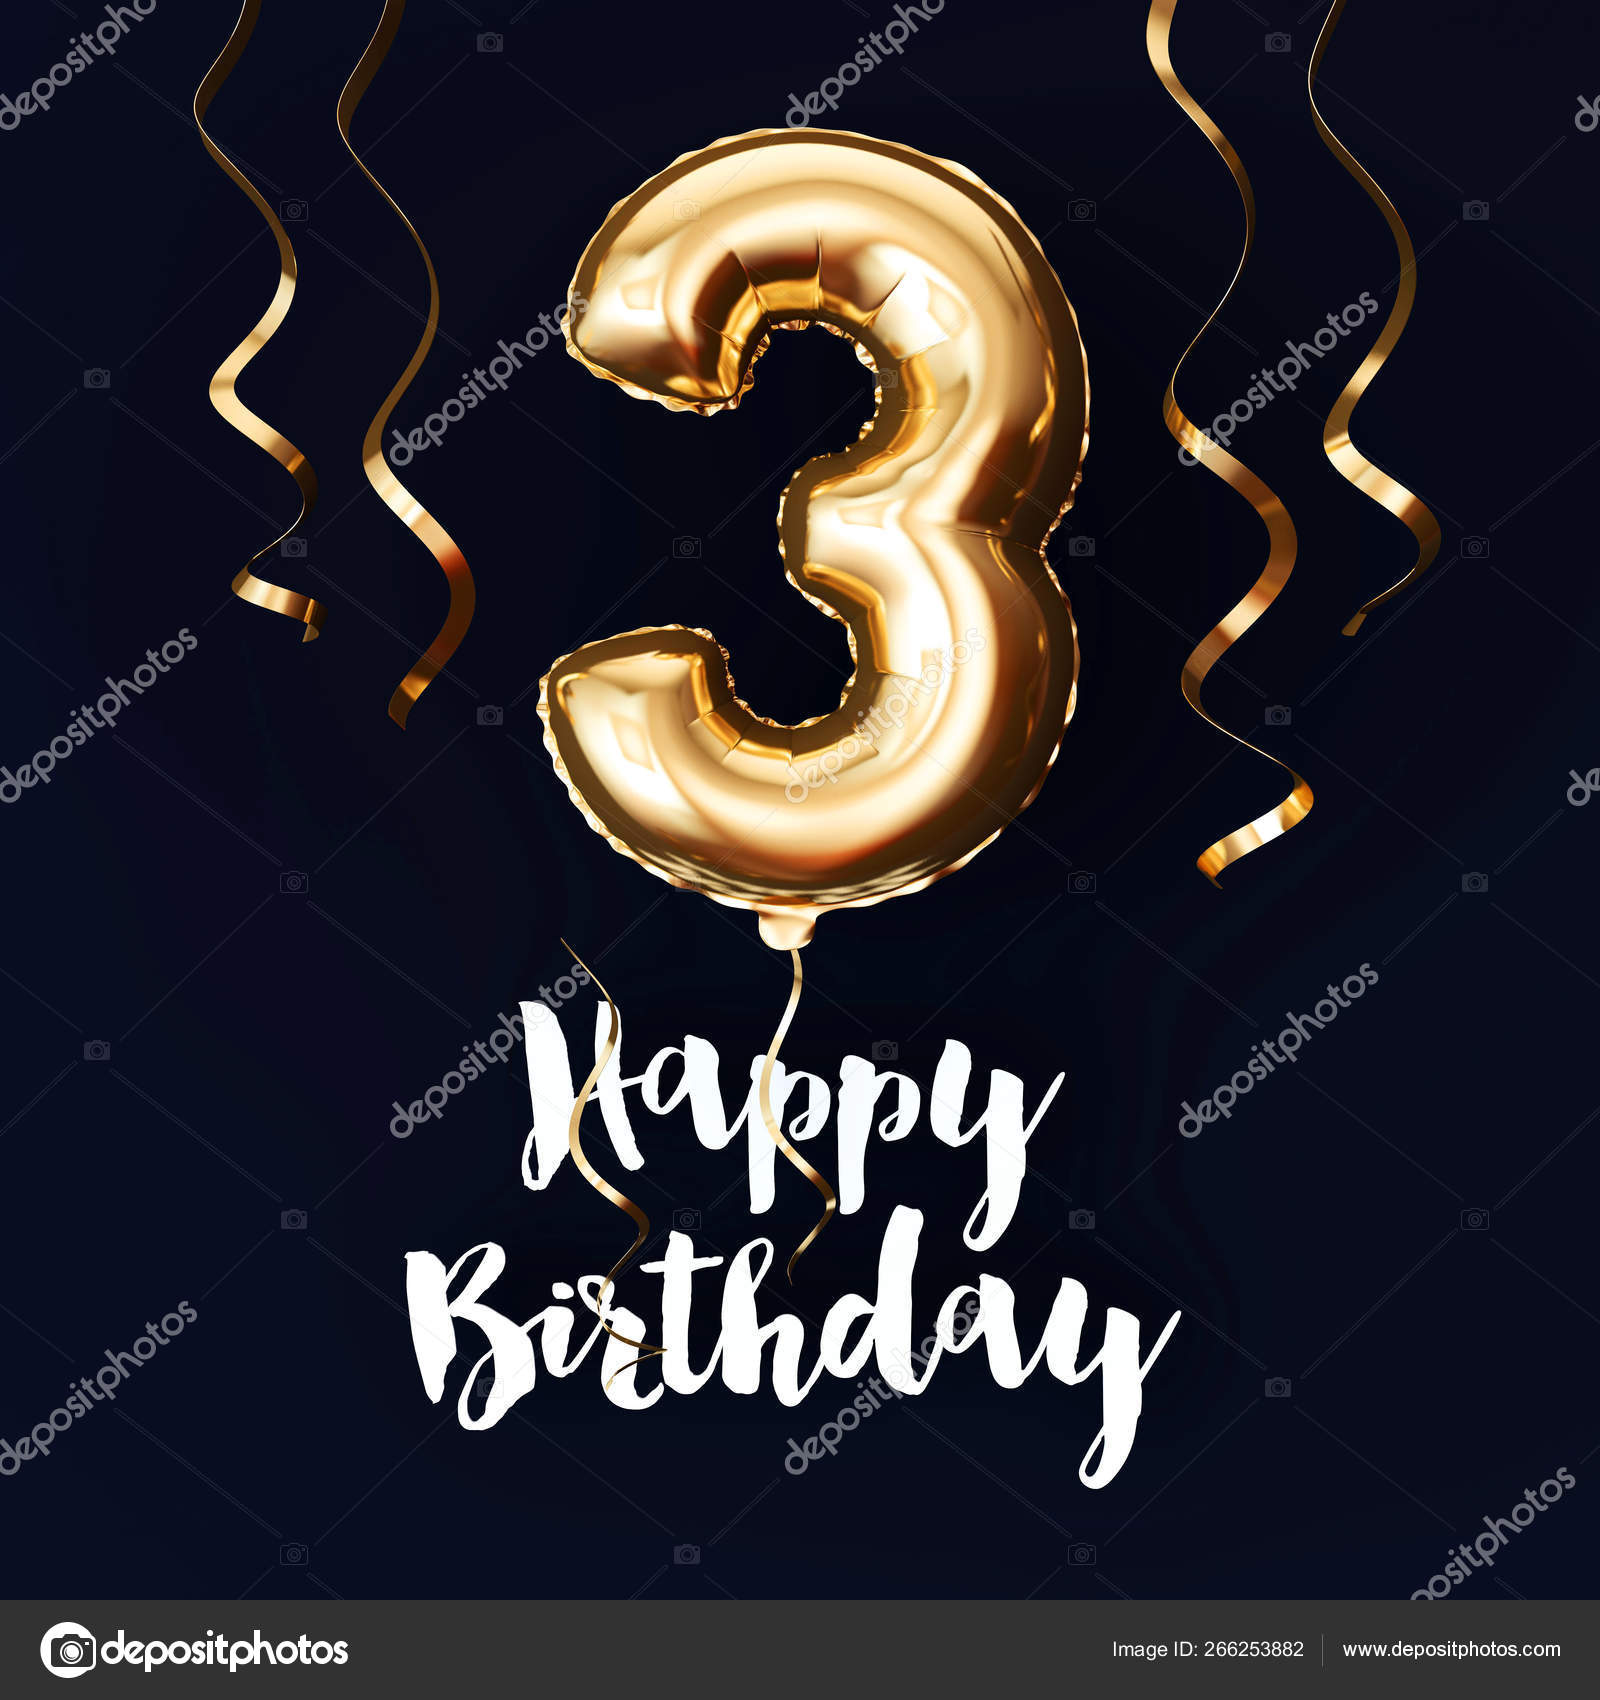 Make your little one\'s 3rd birthday a day to remember with this gorgeous gold foil balloon background with ribbons. This cheerful display will light up the room and make your child feel like a superstar!